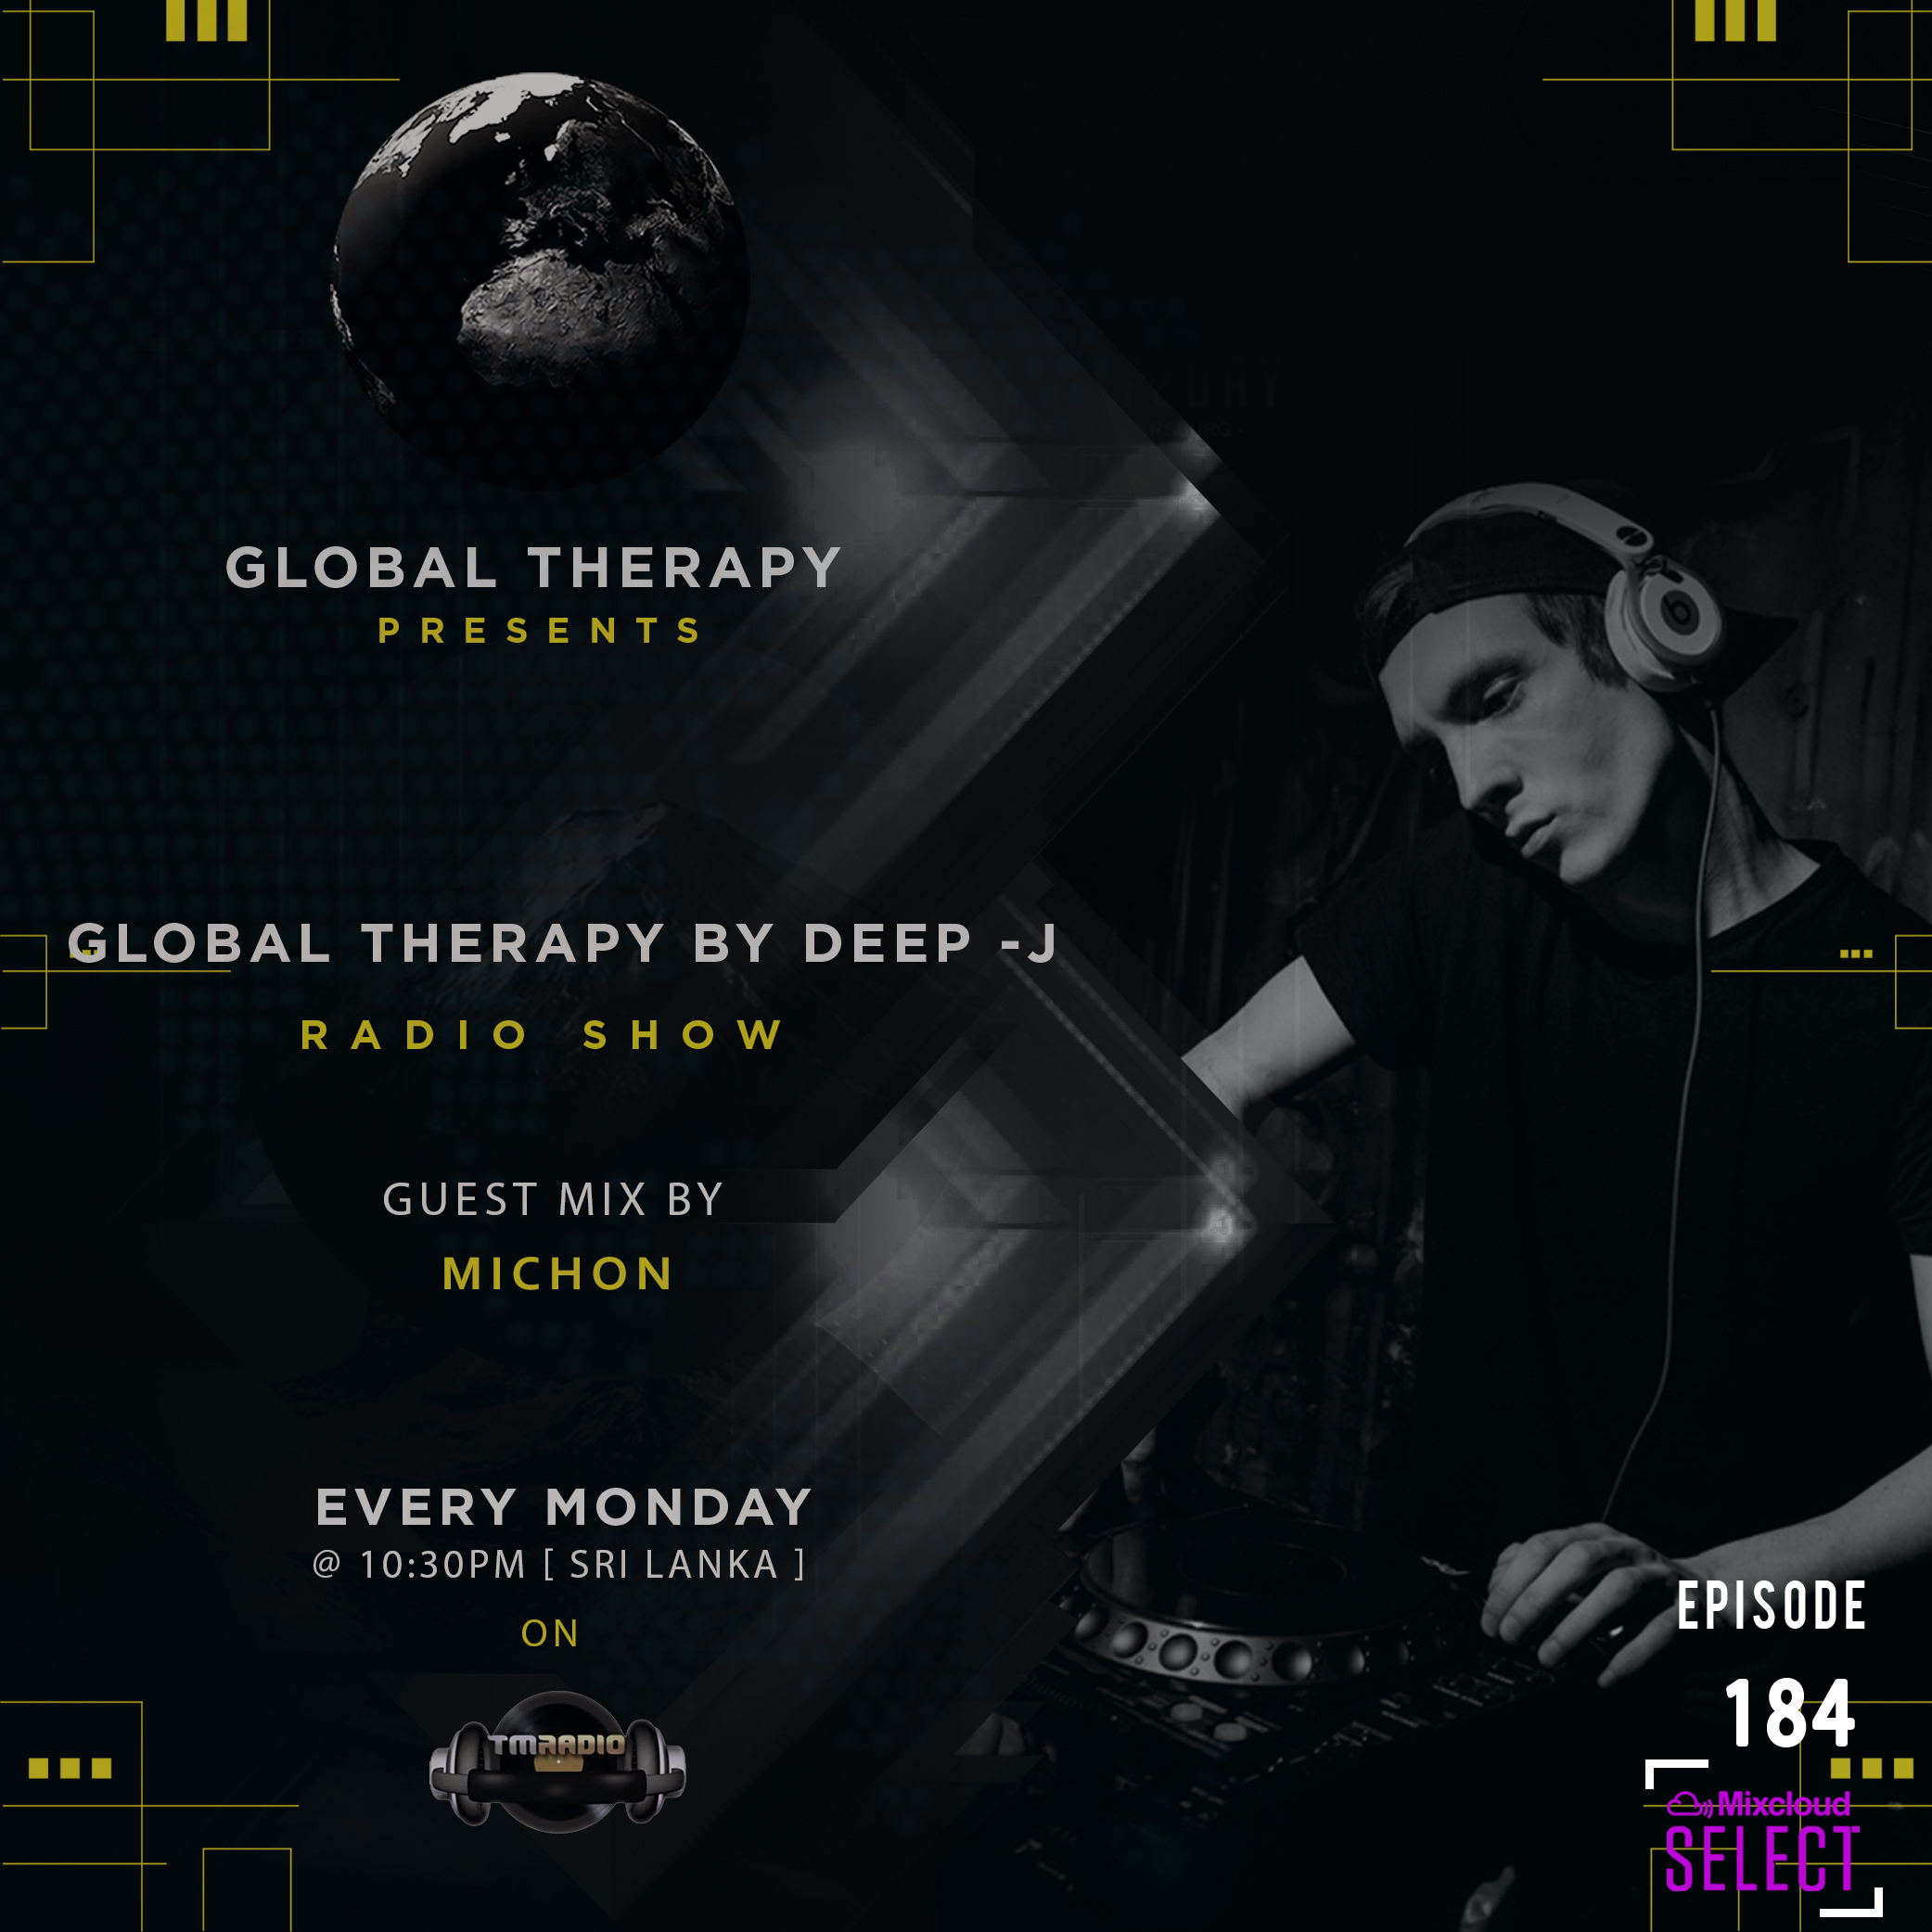 Global Therapy Episode 184 + Guest Mix By MICHON (from April 20th, 2020)